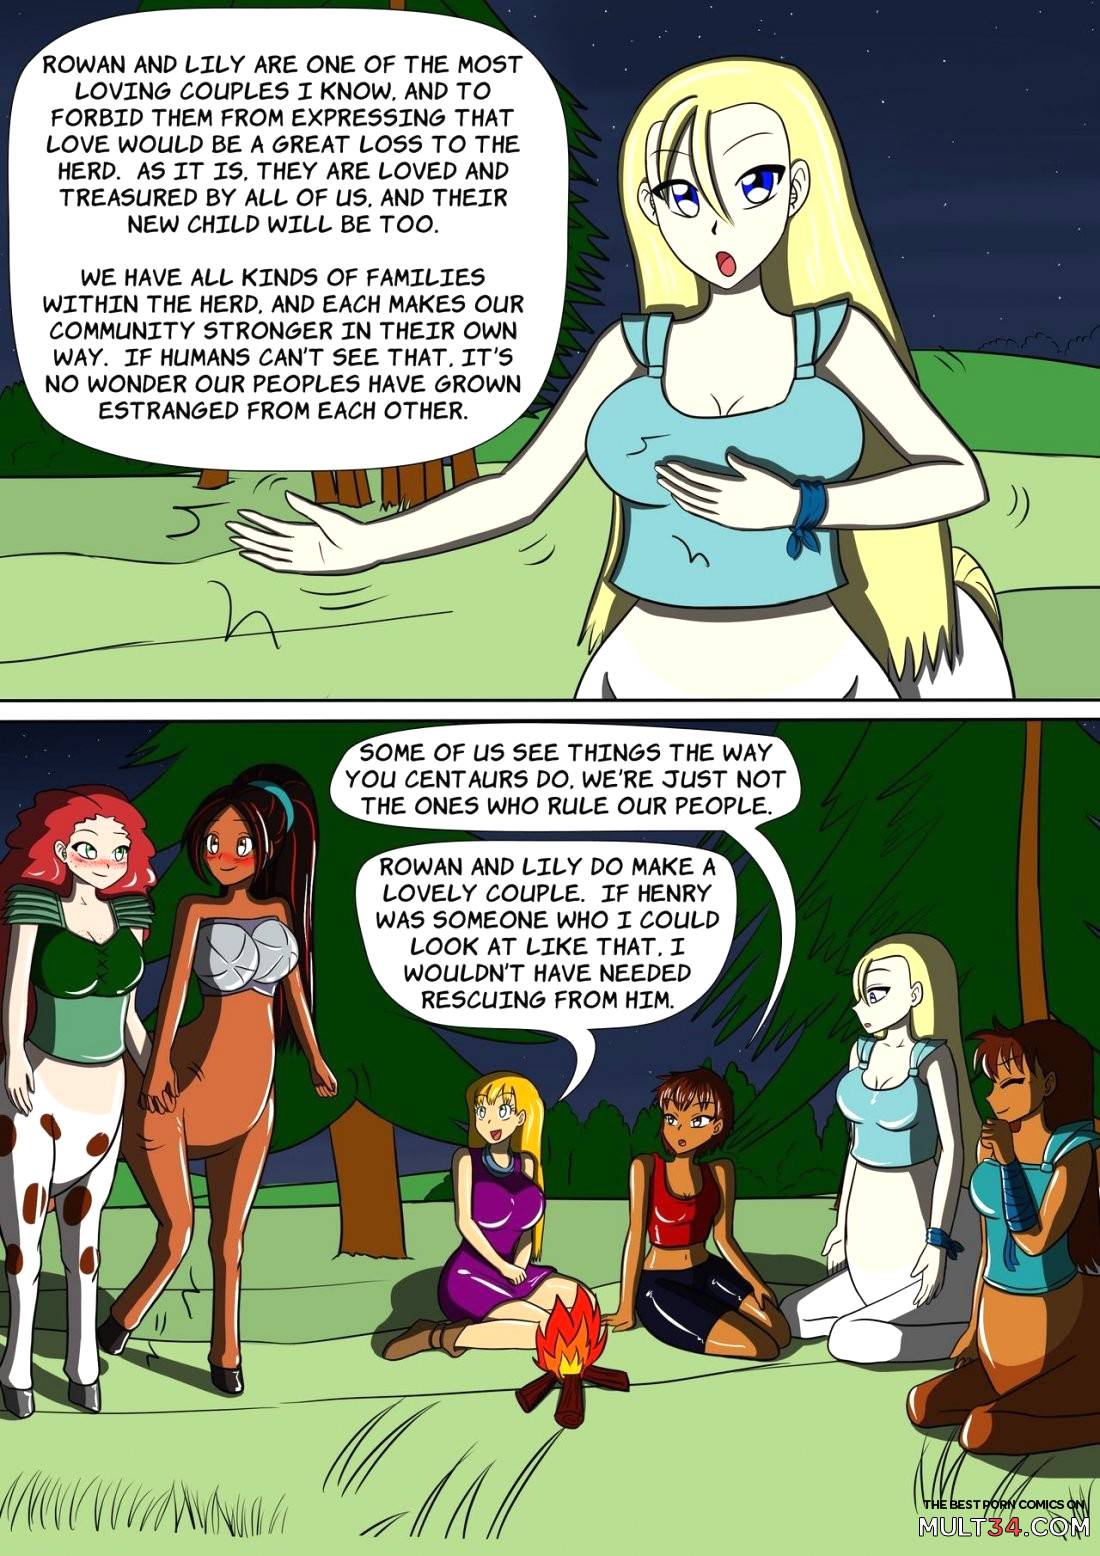 The Centaur's Protective Womb page 17